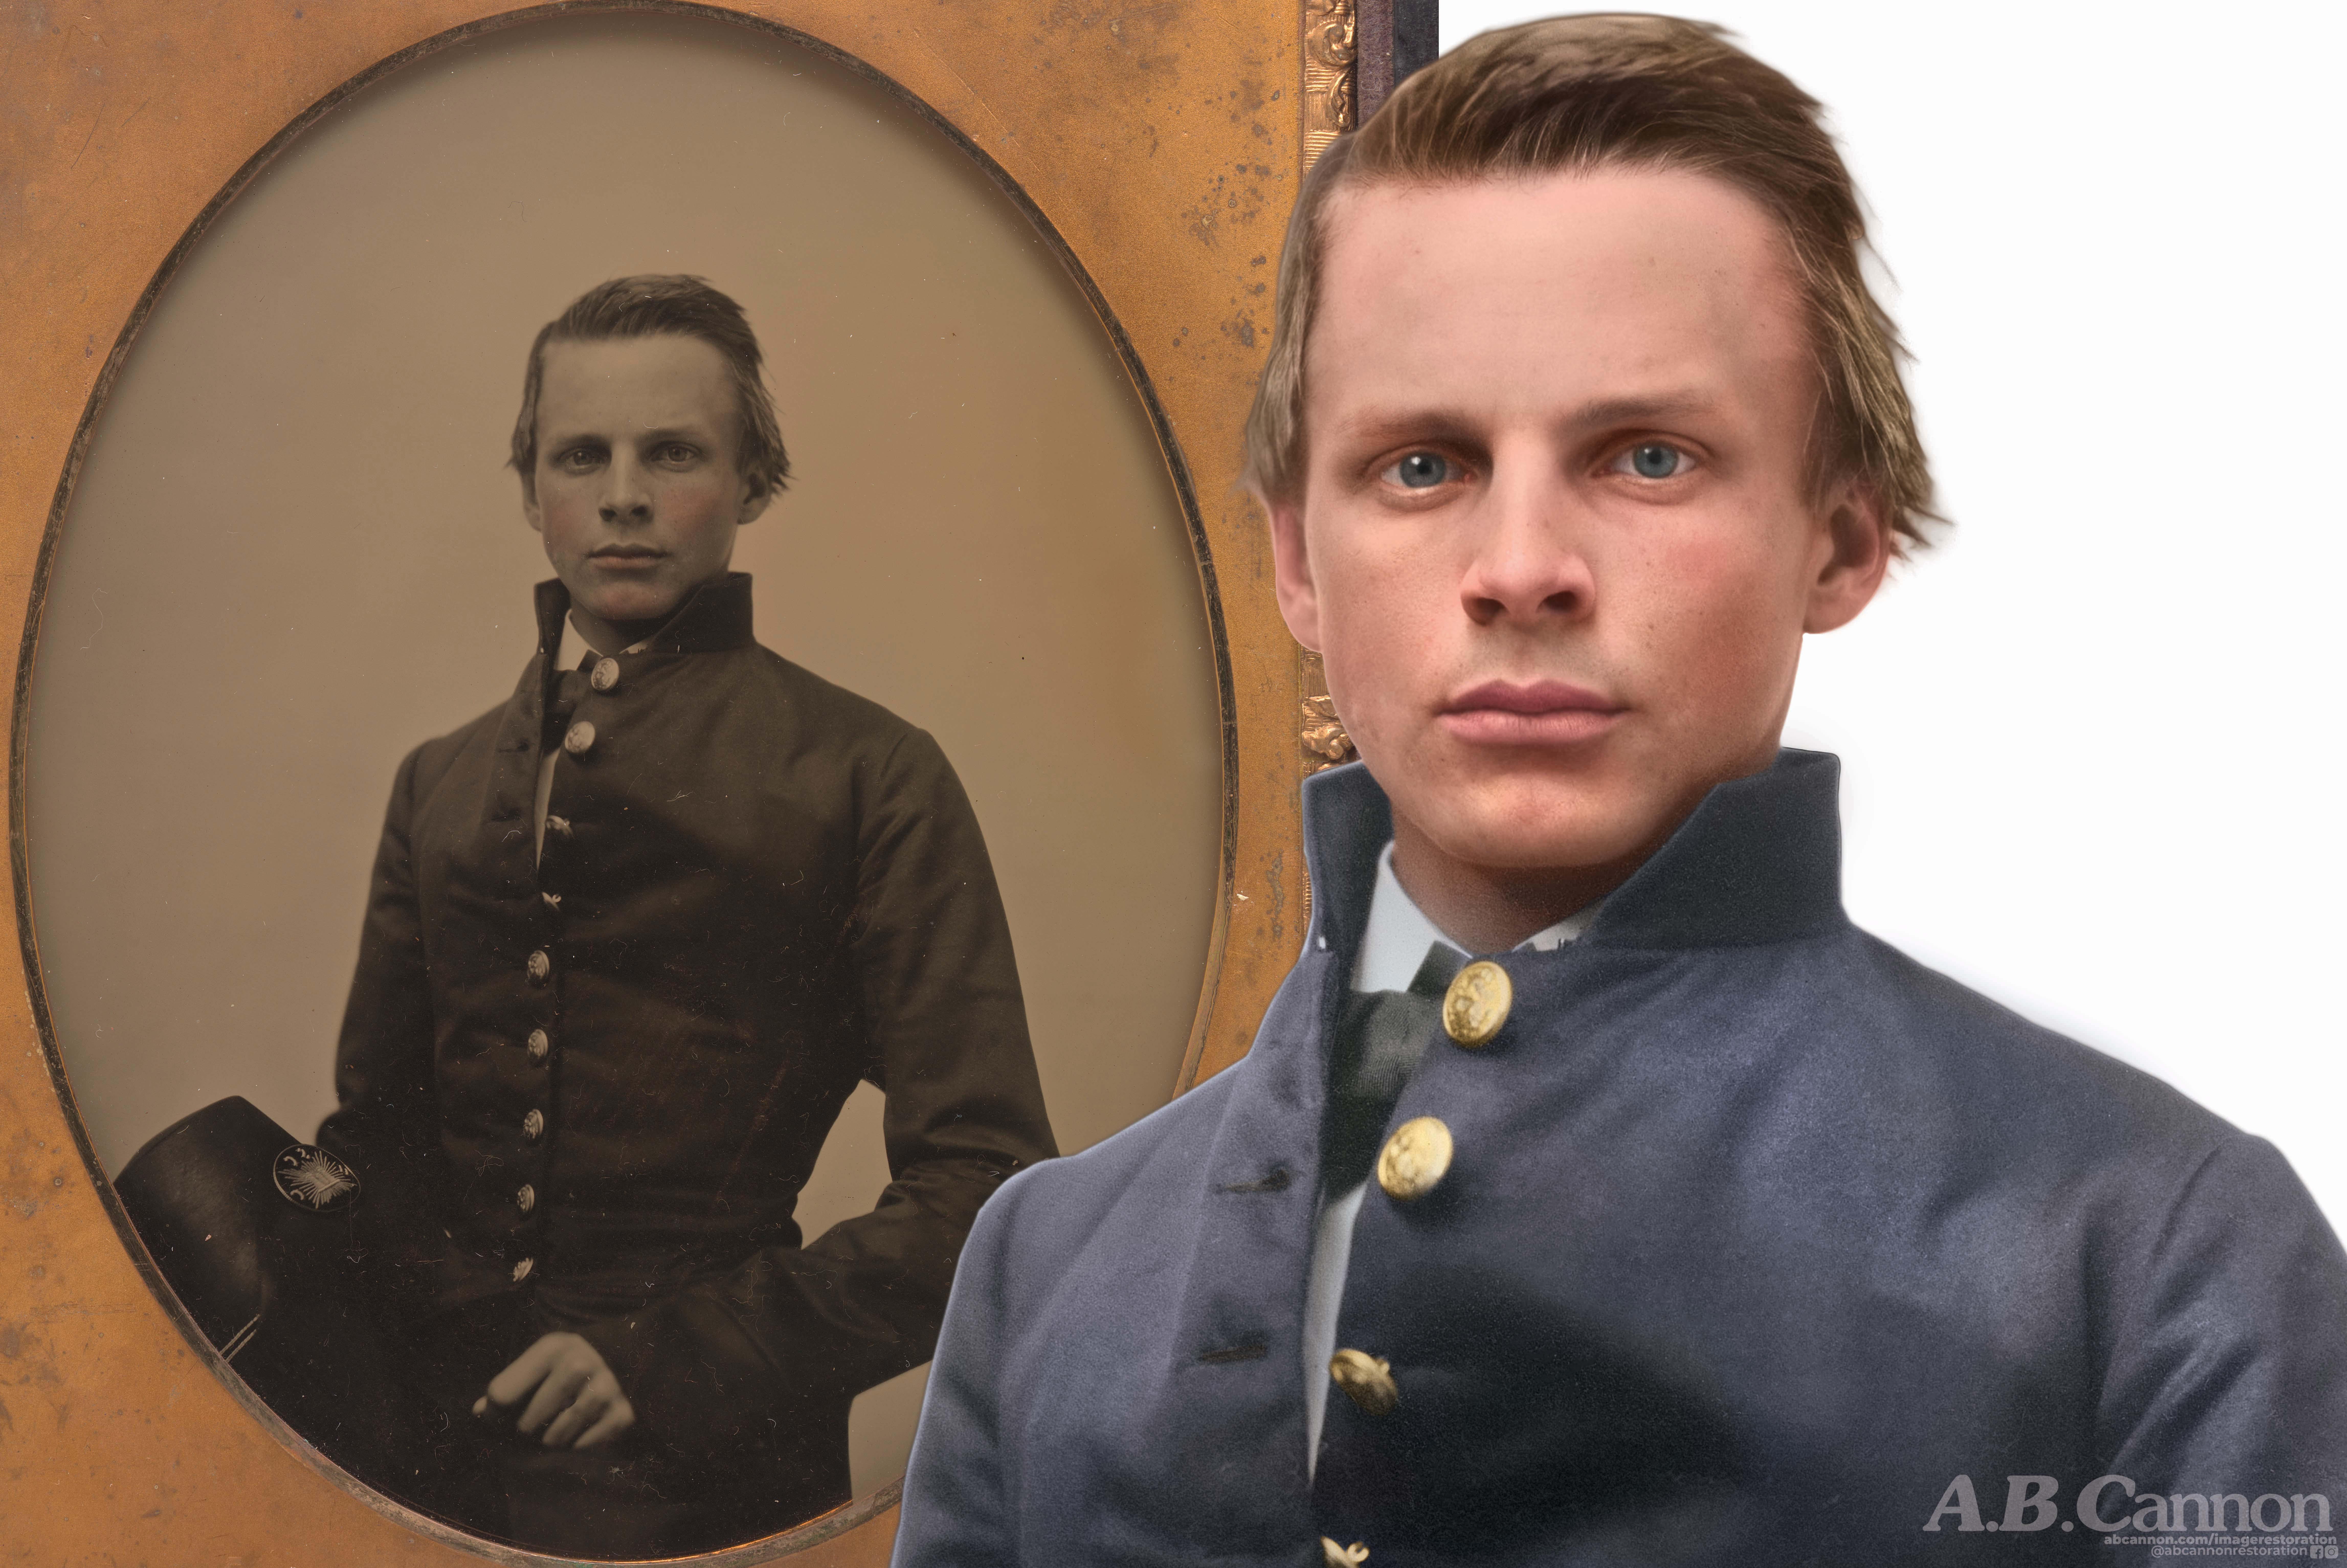 Restored, enhanced, and colorized 162 year-old portrait of a Civil War soldier (1858).jpg